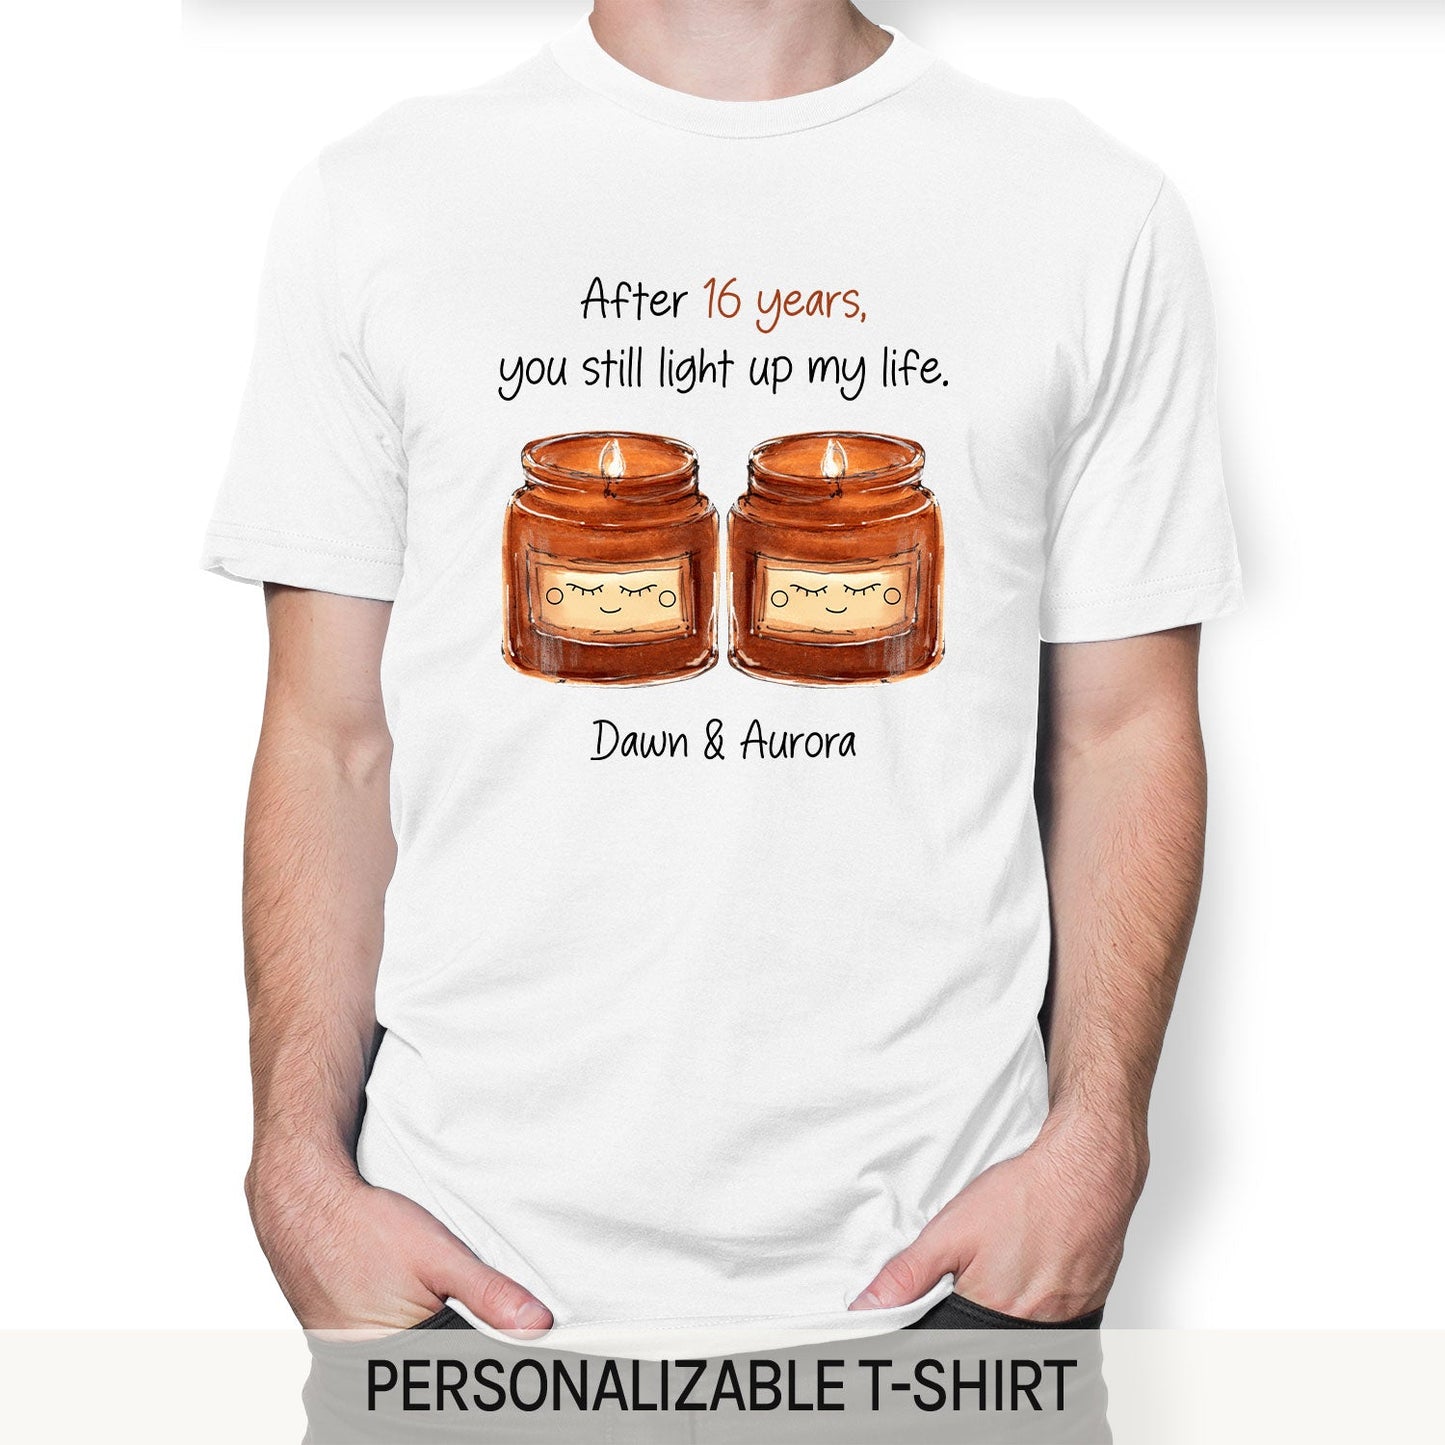 You Still Light Up My Life - Personalized 16 Year Anniversary gift For Husband or Wife - Custom Tshirt - MyMindfulGifts